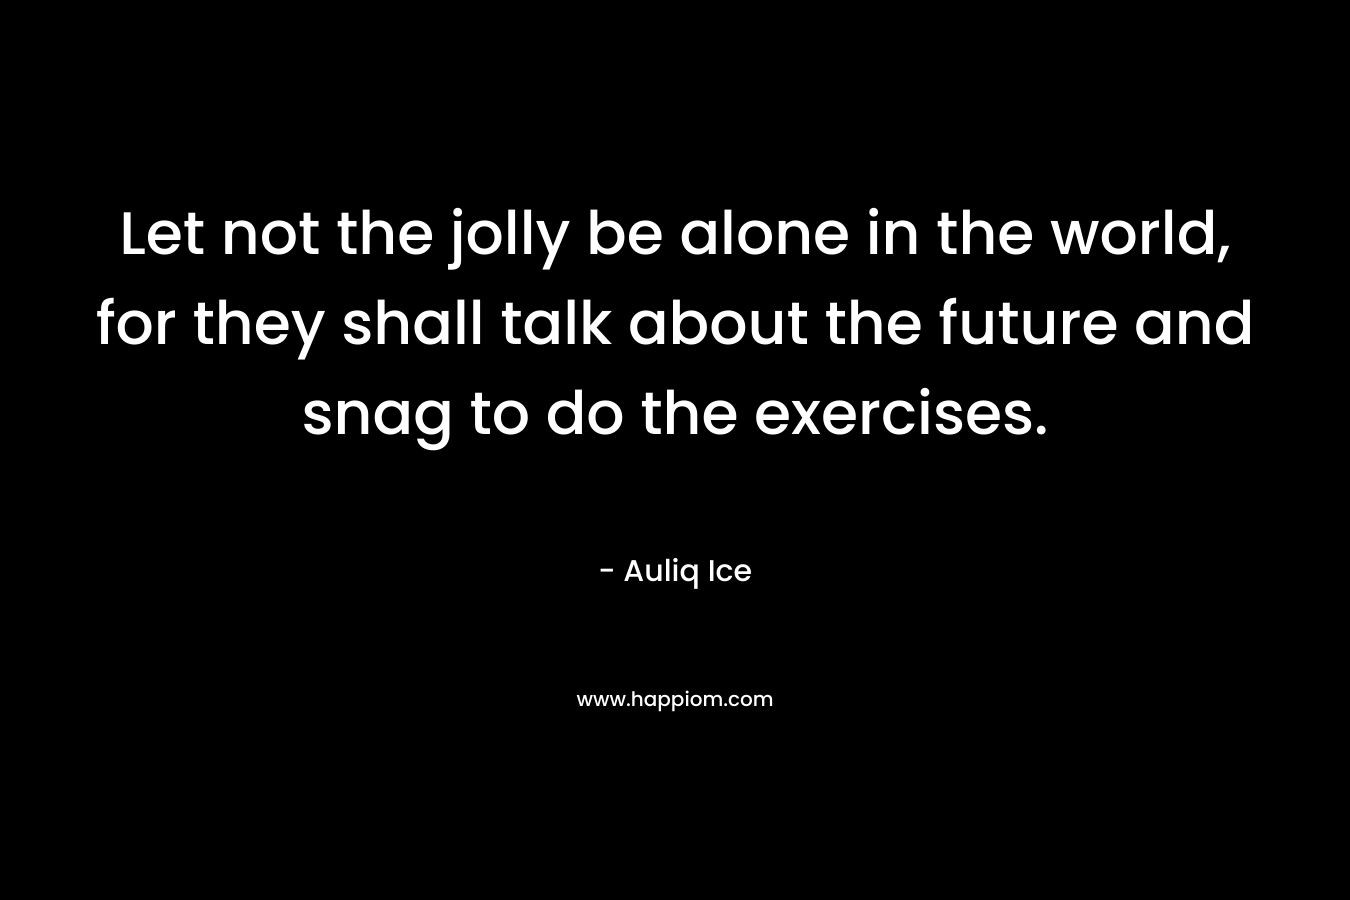 Let not the jolly be alone in the world, for they shall talk about the future and snag to do the exercises.